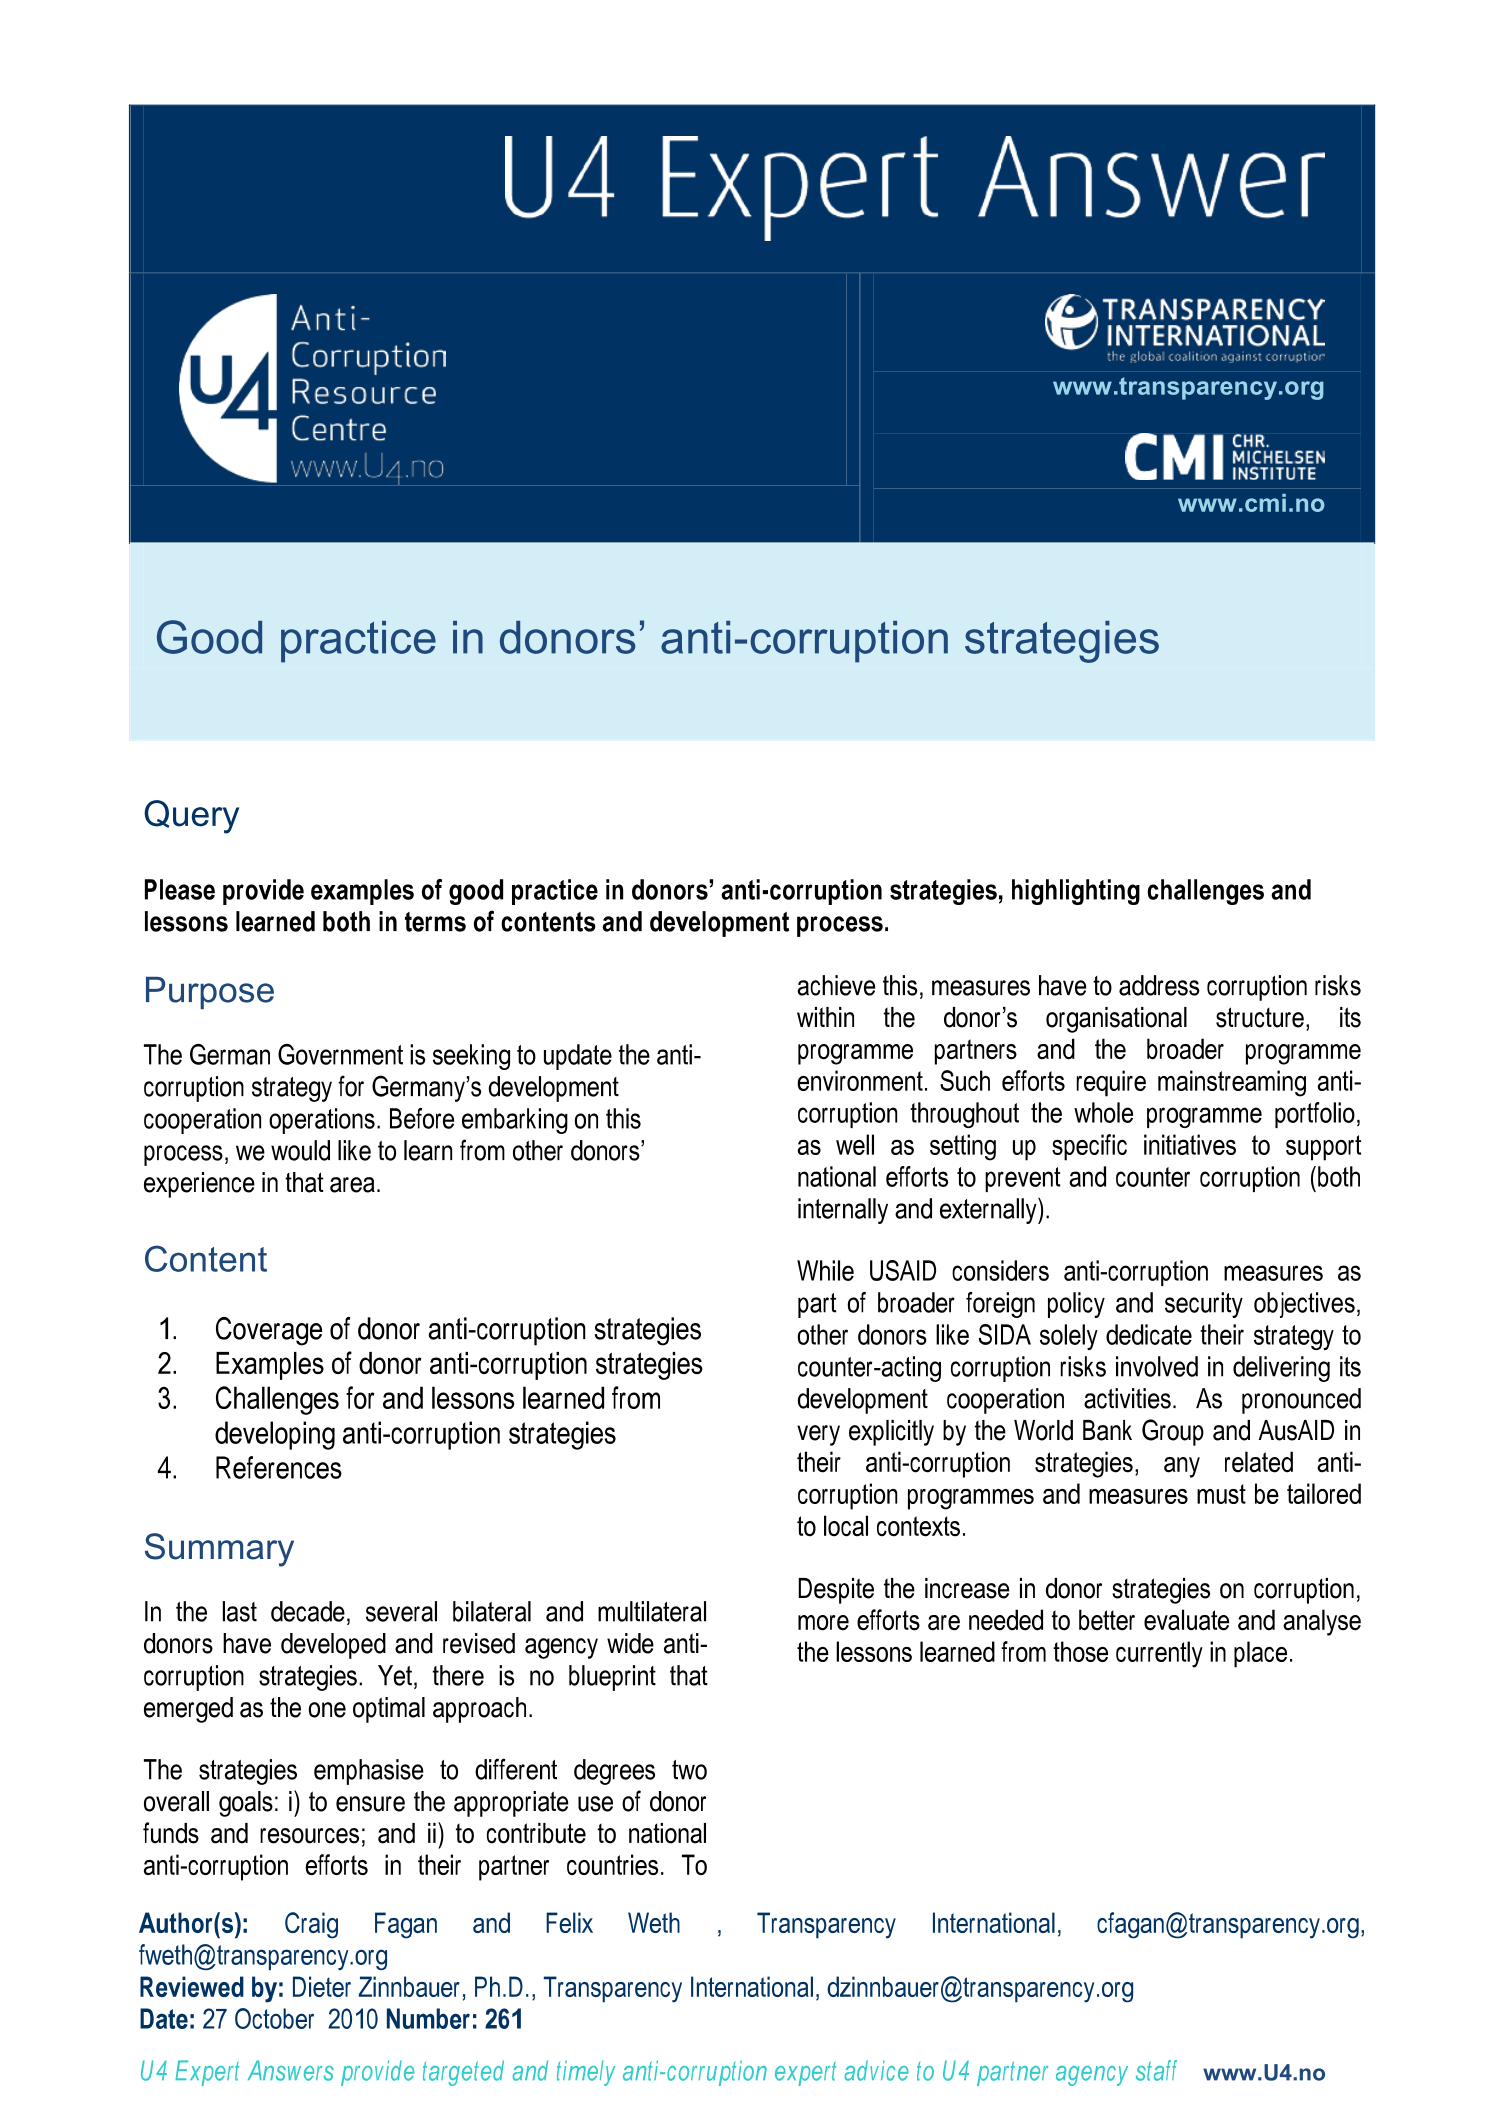 Good practice in donors’ anti-corruption strategies